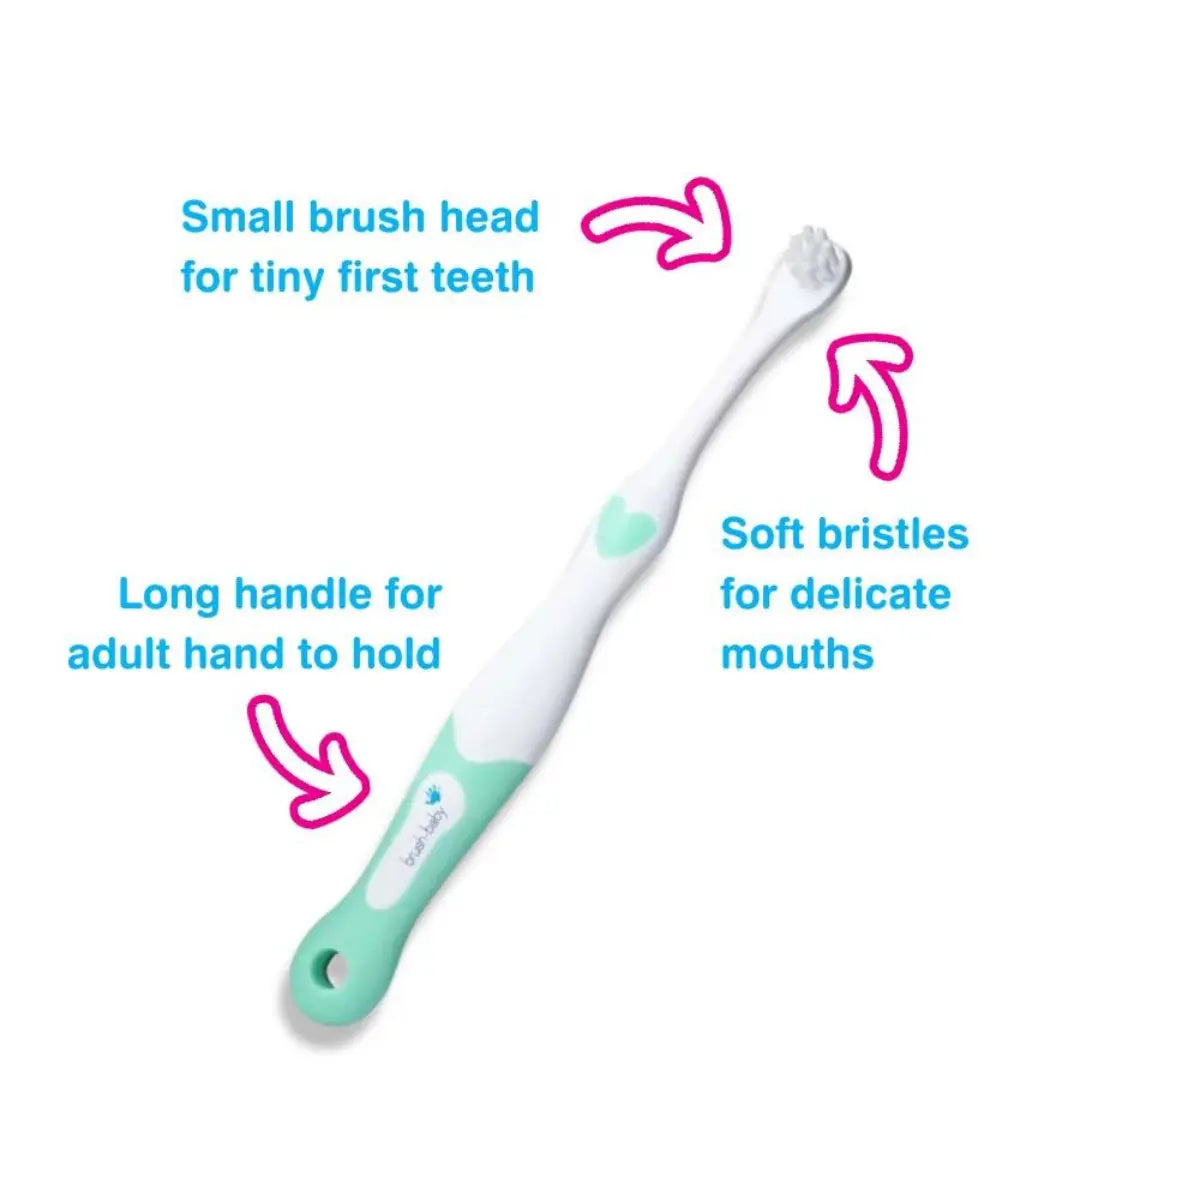 MyFirst Baby Toothbrush Bristles Toothbrush Unique Selling Points 